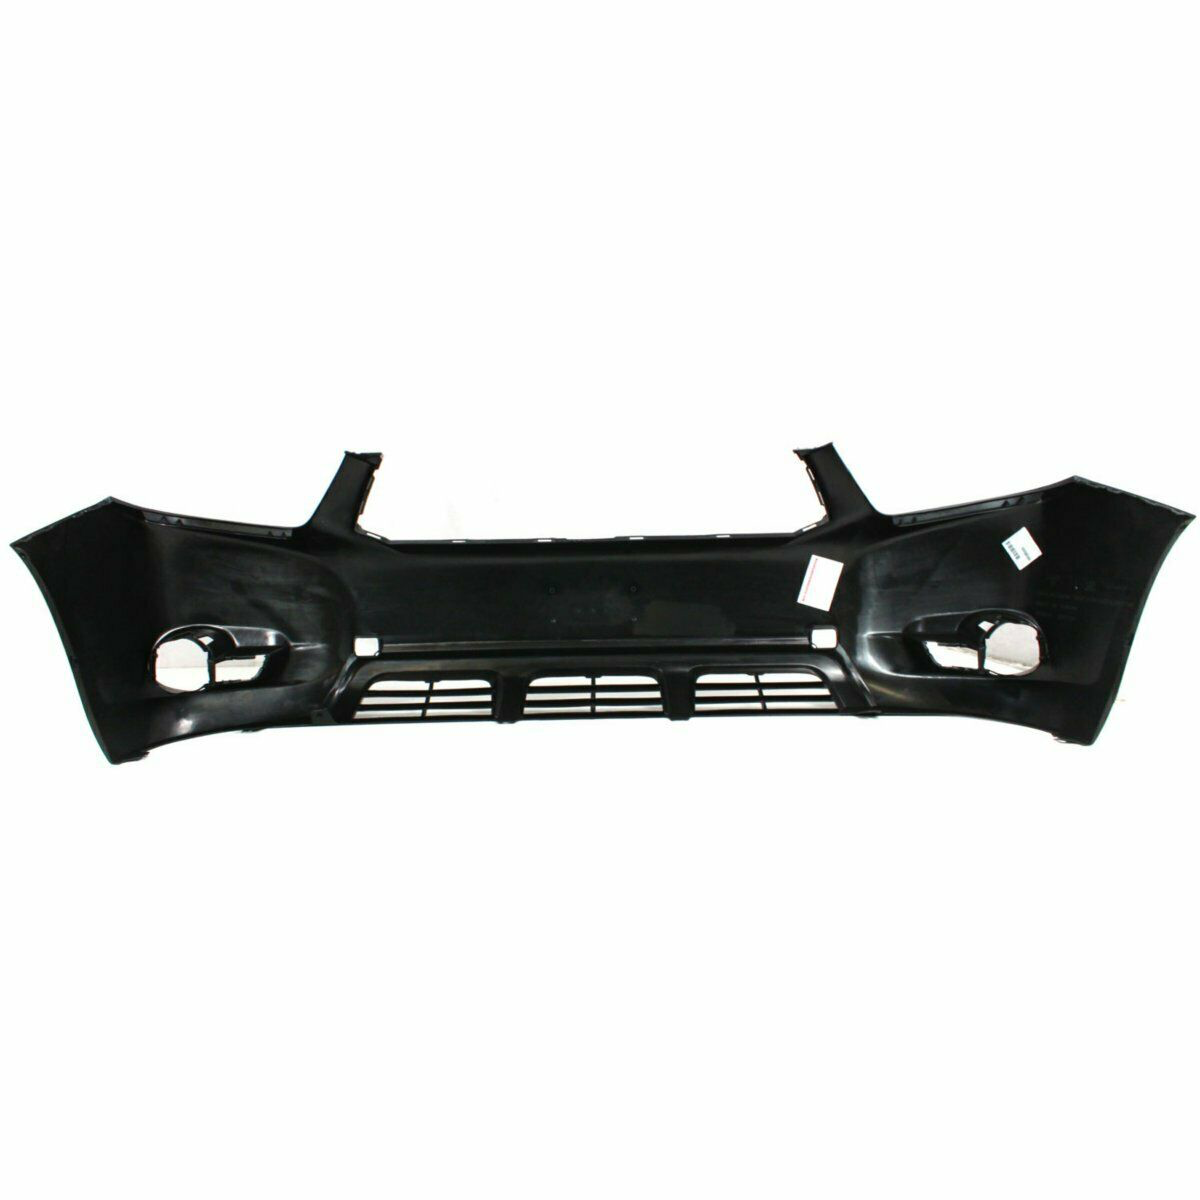 2008-2010 Toyota Highlander Front Bumper Painted to Match